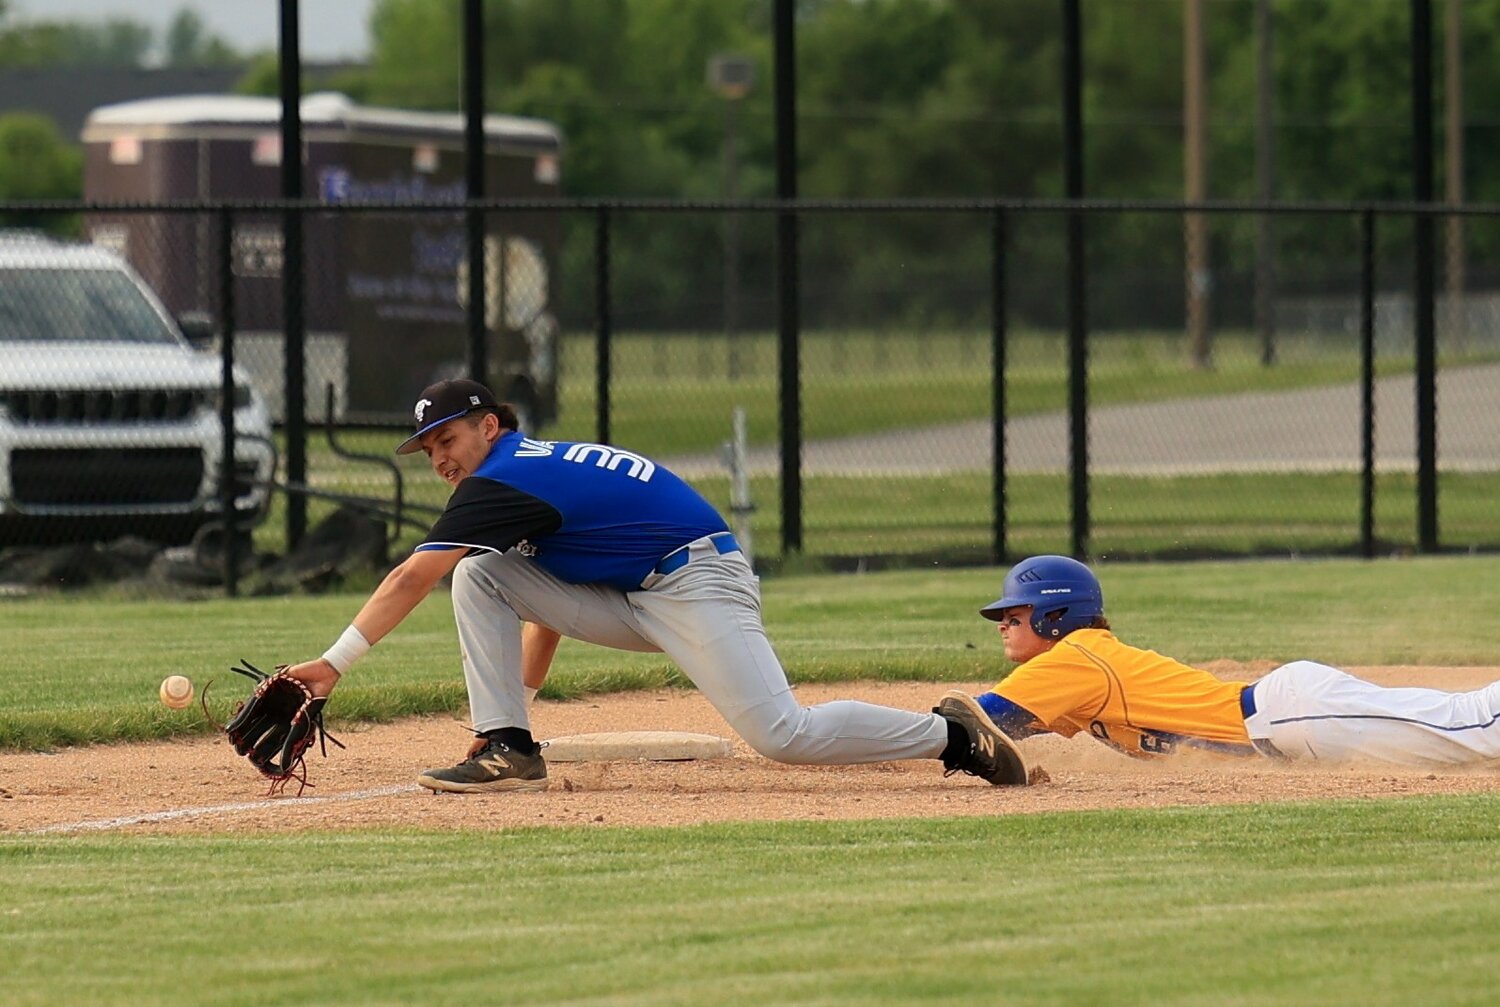 Jude Coursey slides into third during the Athenian win.